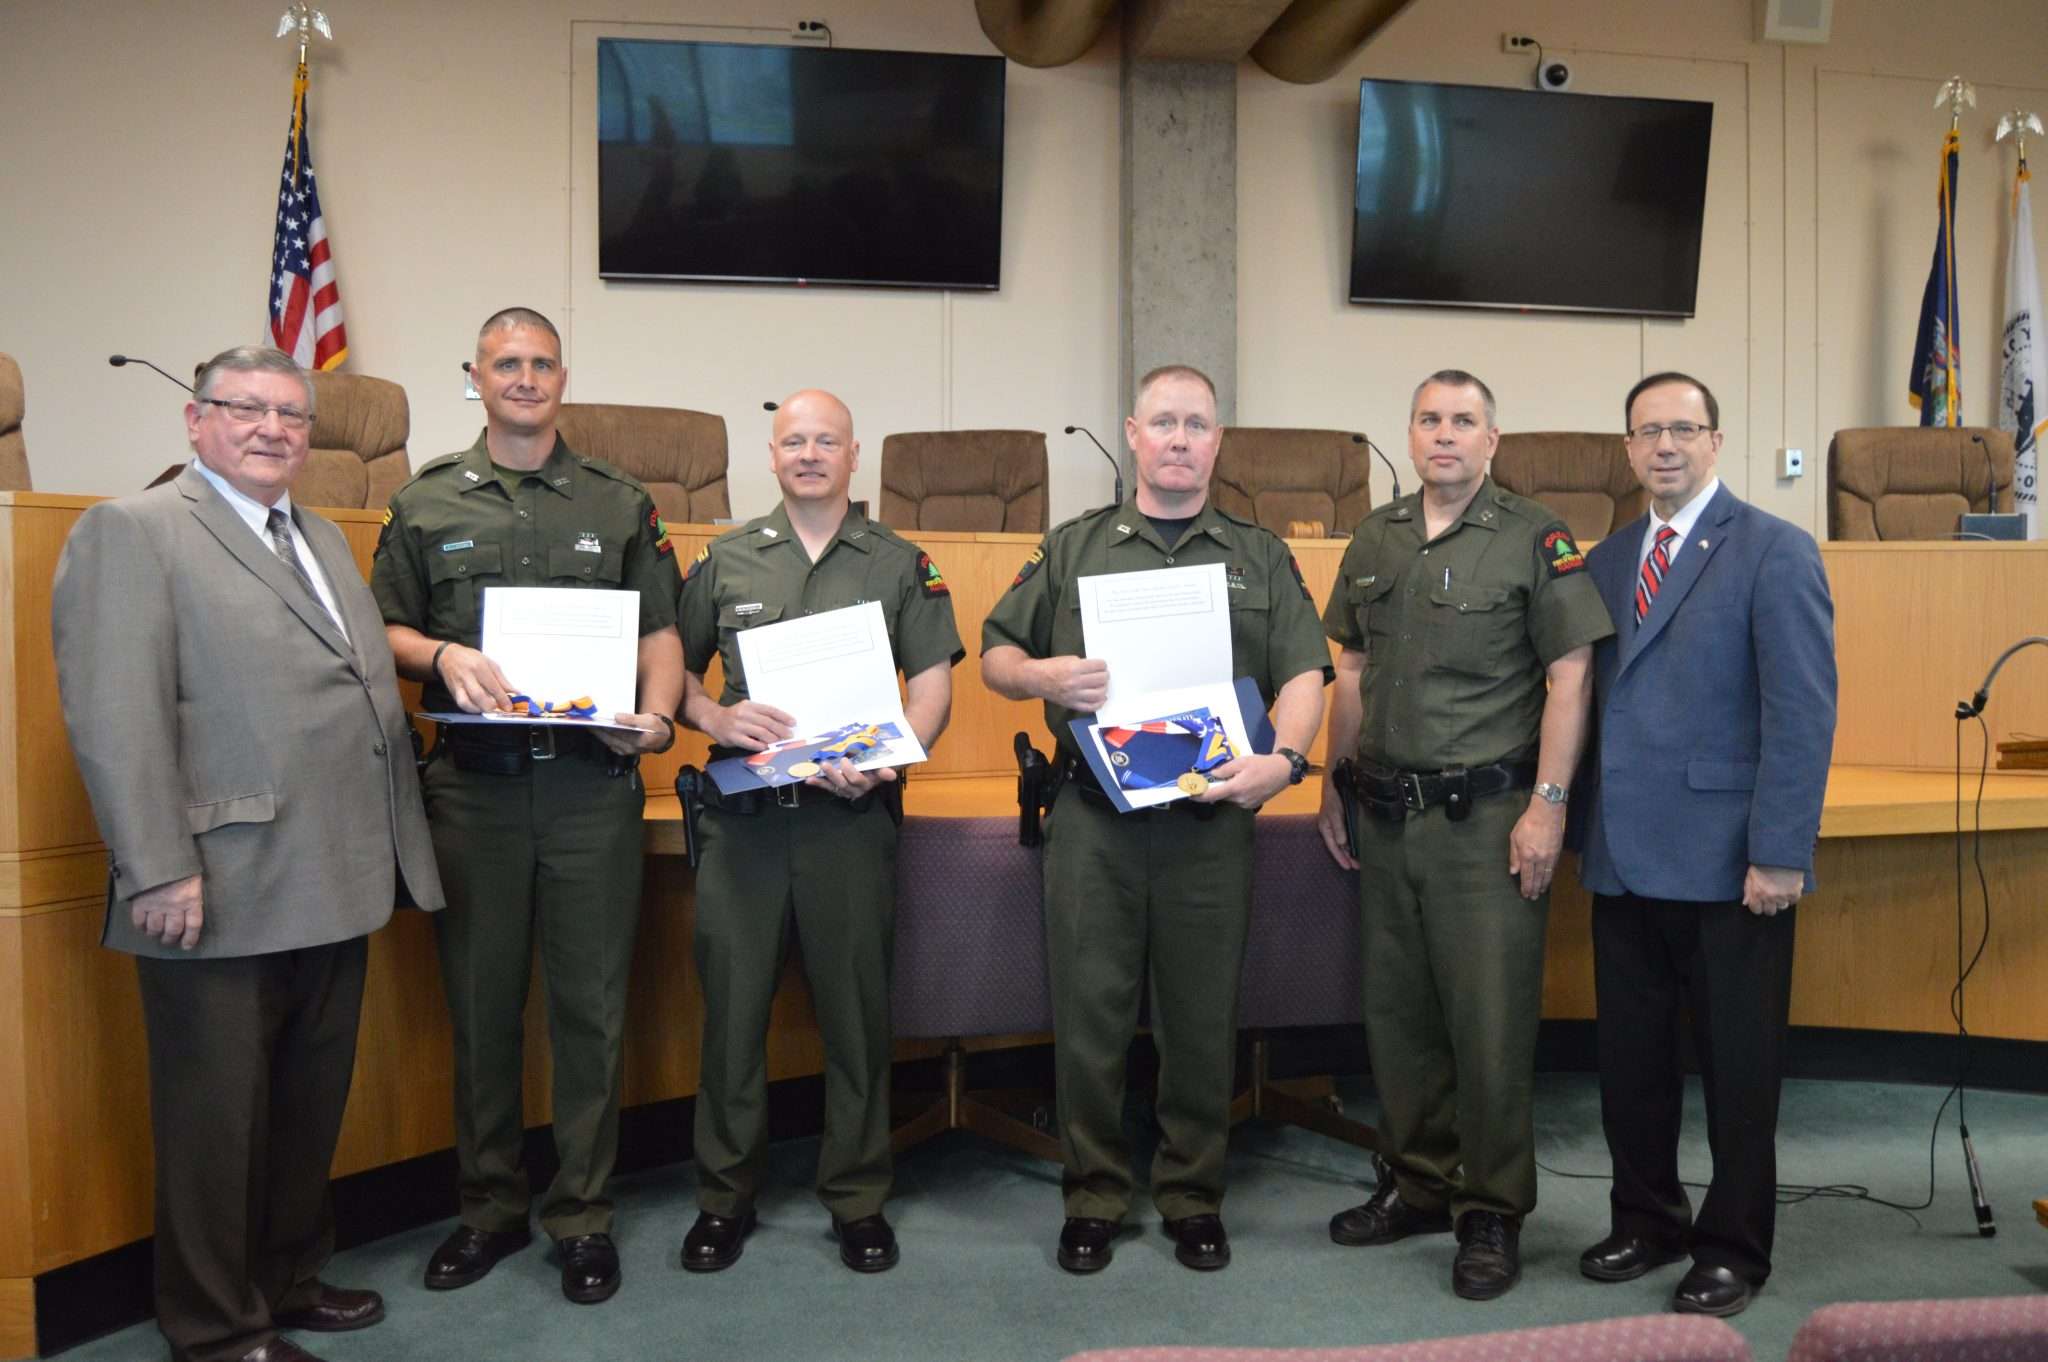 In 2018, State Sen. Joseph Griffo, R-Rome, right, presented Liberty Medals to  three forest rangers for exceptional, heroic, or  humanitarian acts and achievements on behalf of their fellow New Yorkers, including  Ranger David Cornell, third from left, who was credited with taking life-saving medical actions for a motorcyclist who was in an accident in the town of Vienna. 